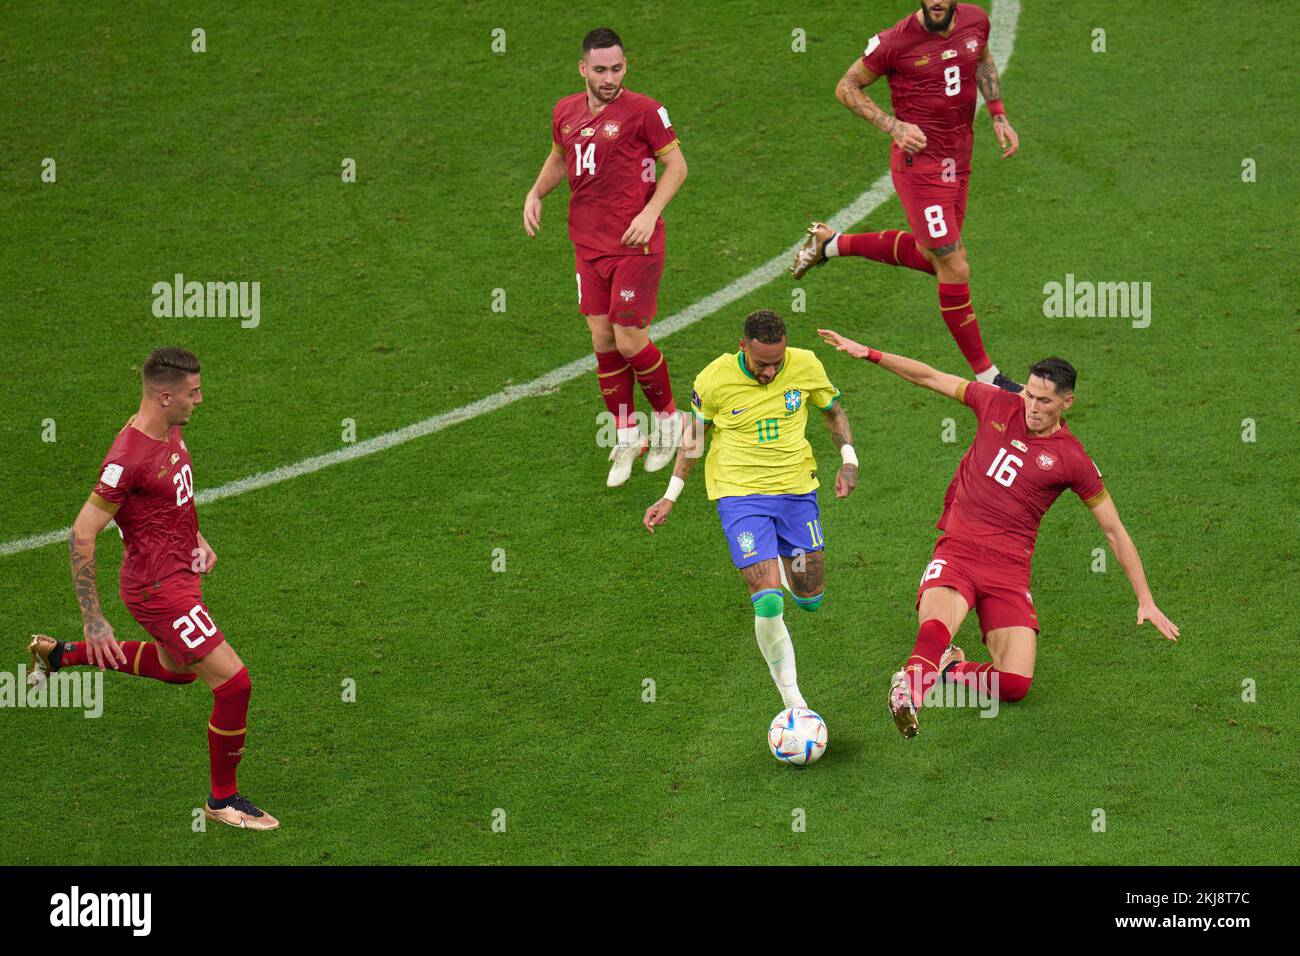 Lusail, Qatar. 24th Nov, 2022. Neymar (C) of Brazil controls the ball during the Group G match between Brazil and Serbia at the 2022 FIFA World Cup at Lusail Stadium in Lusail, Qatar, Nov. 24, 2022. Credit: Meng Dingbo/Xinhua/Alamy Live News Stock Photo